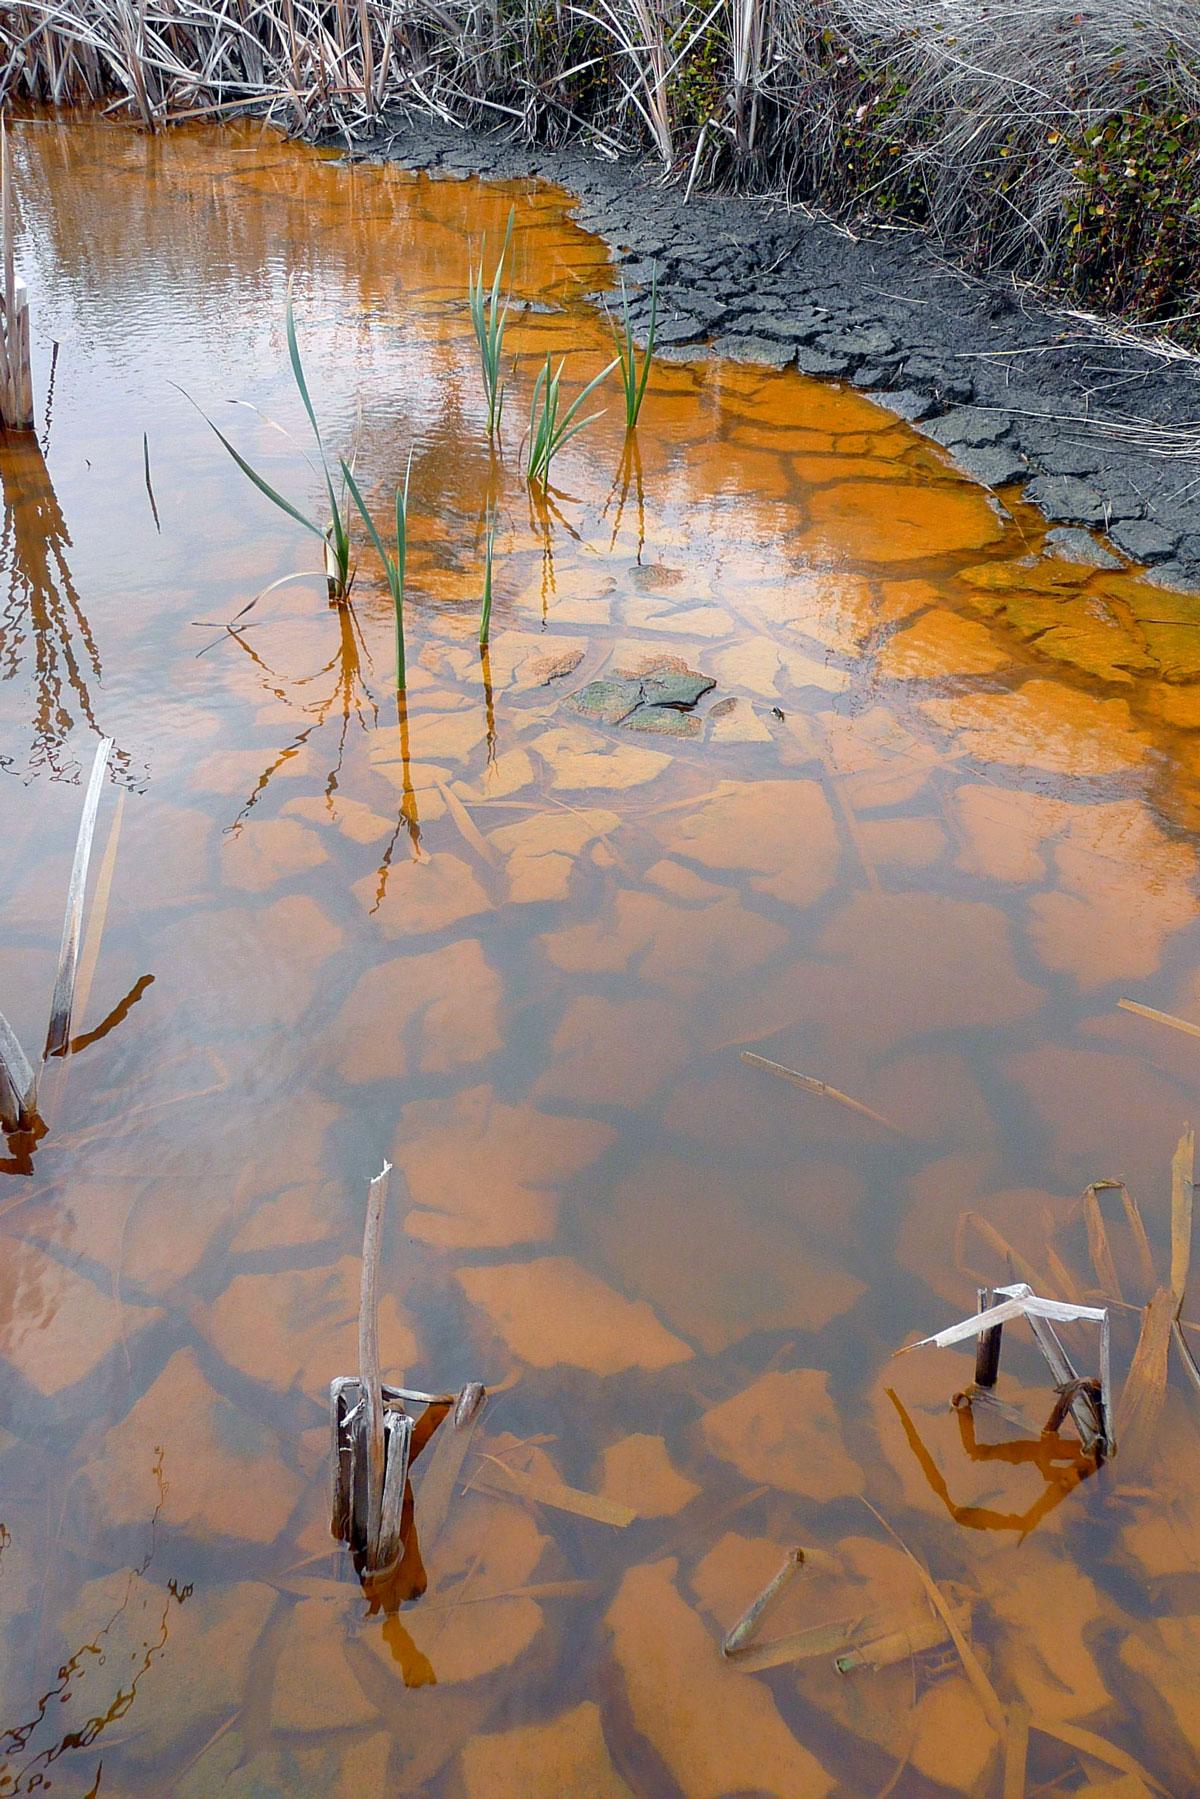 Acidic (pH 4) and iron rich (indicated by orange-brown colour) water in a wetland following exposure during drought. Credit: Luke Mosley